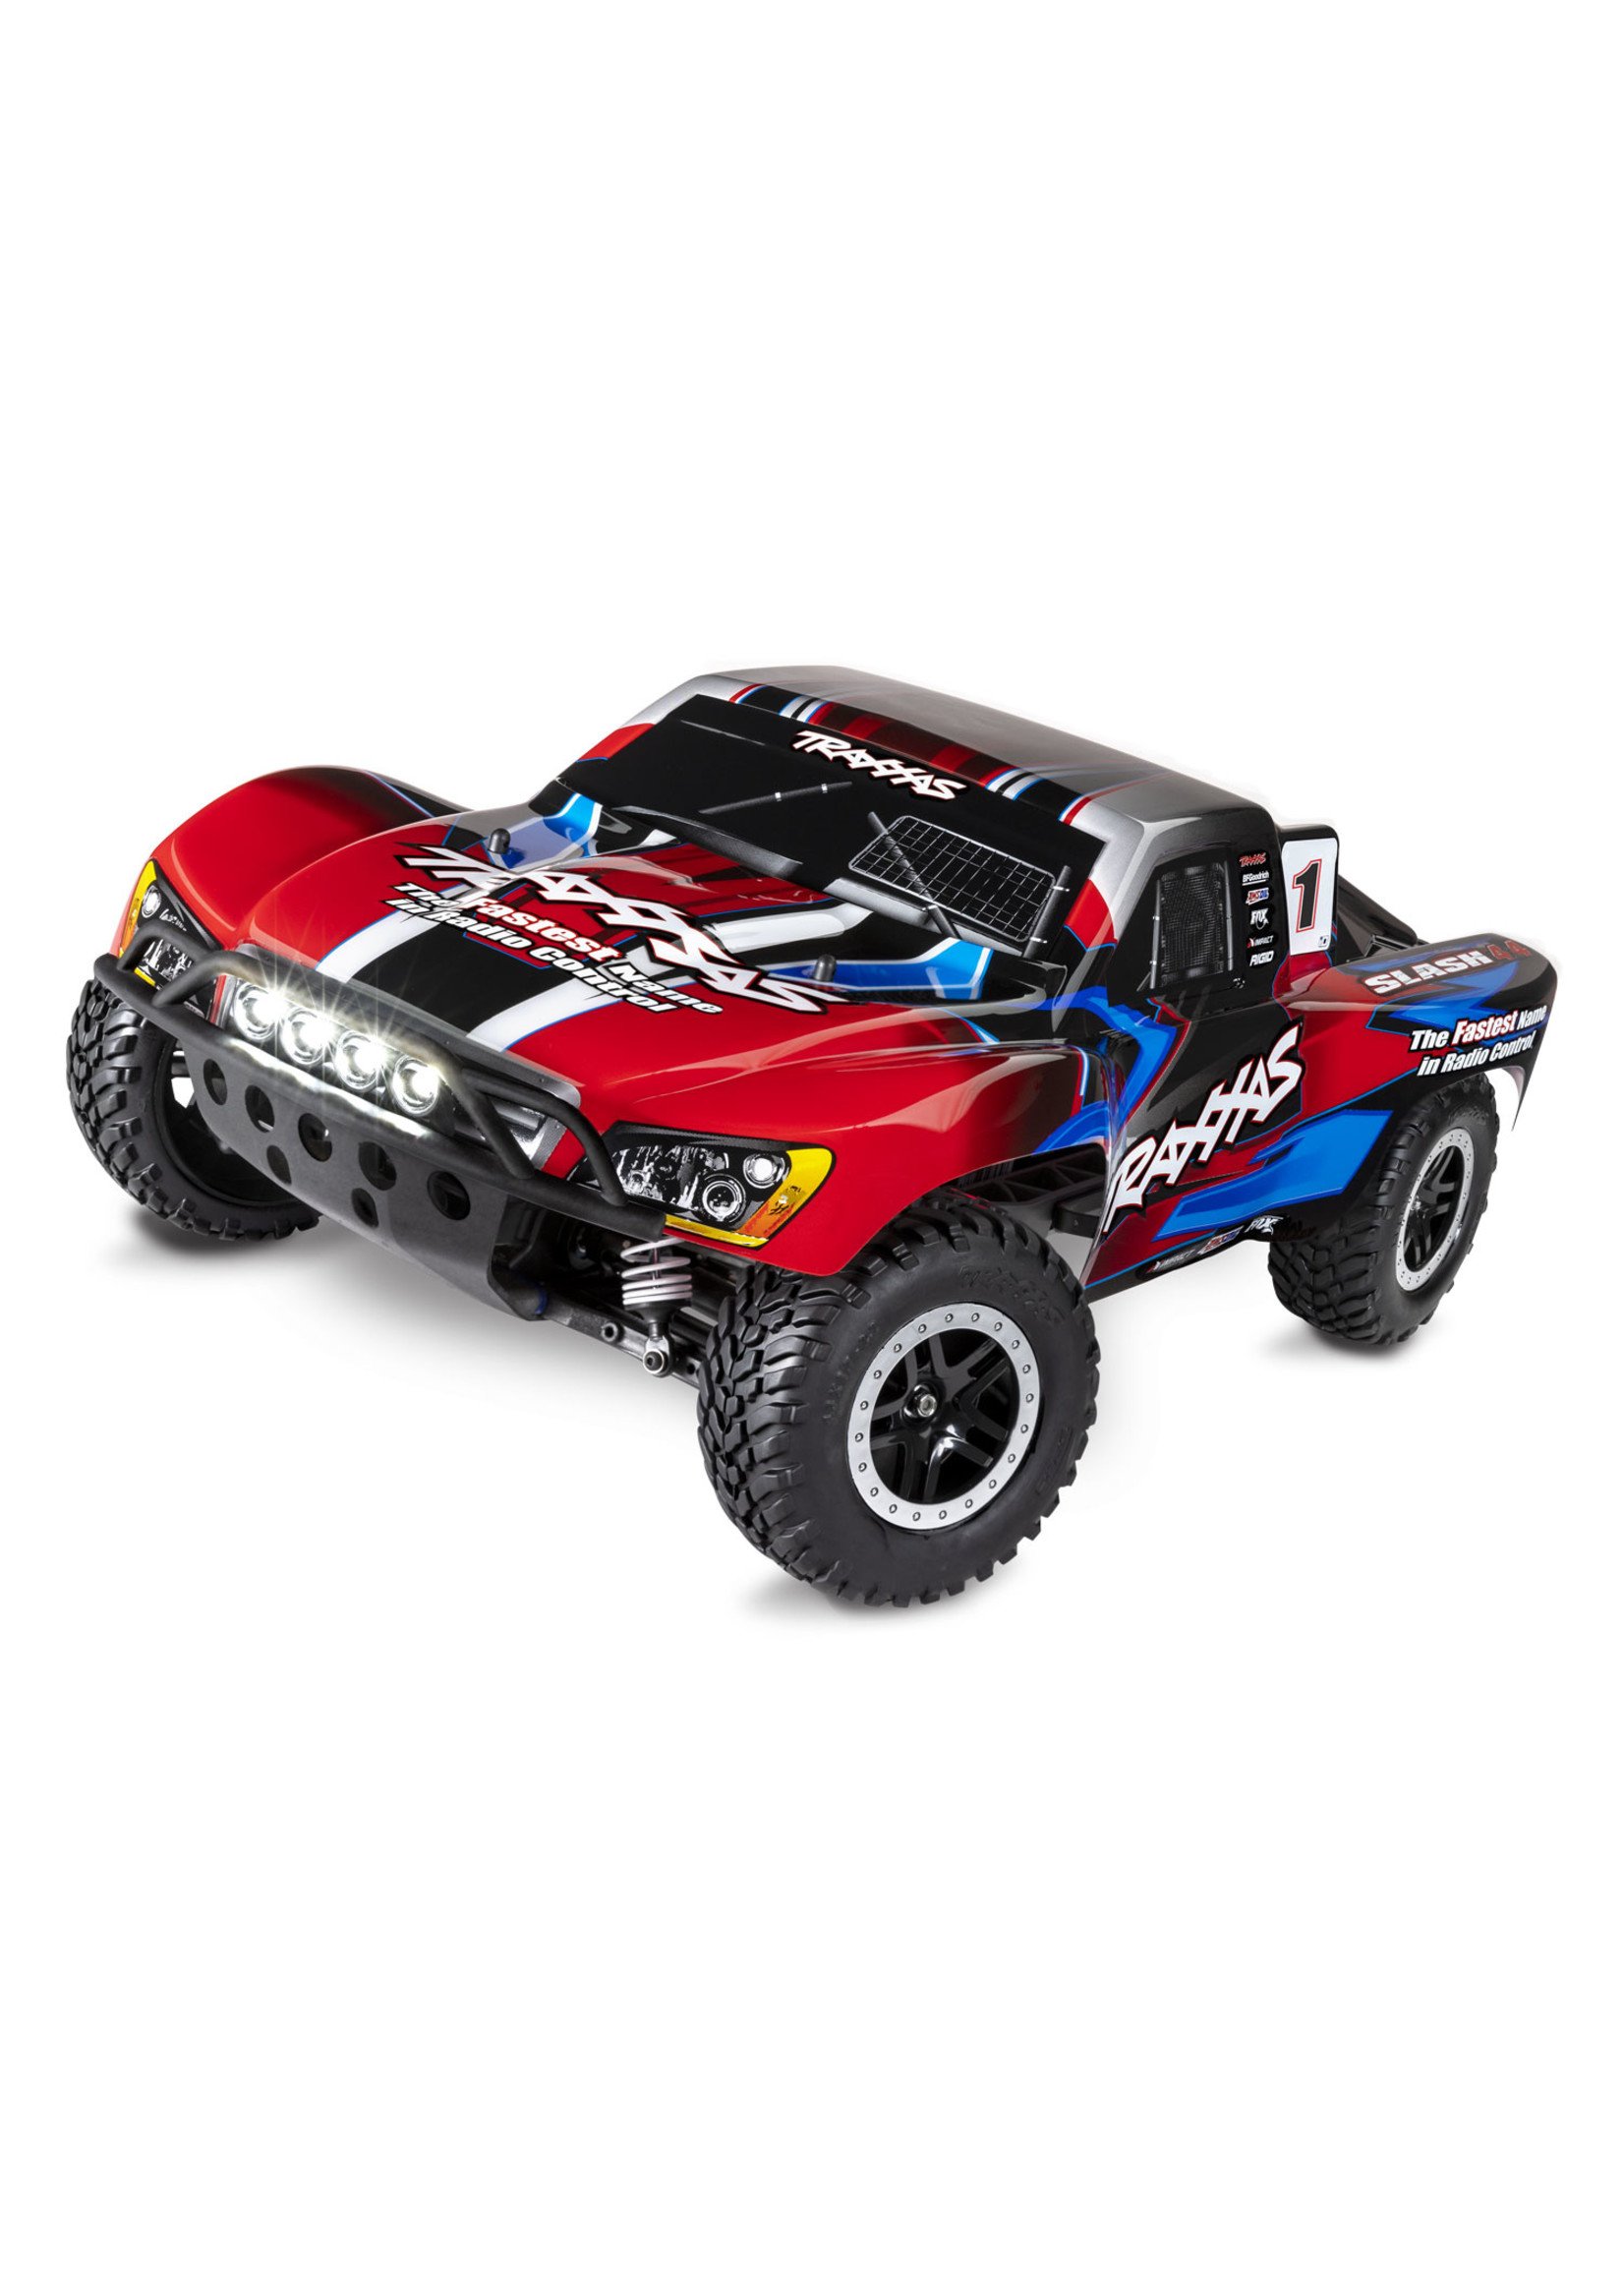 Traxxas 1/10 Slash 4X4 RTR Brushed SCT with LED Lights - Red